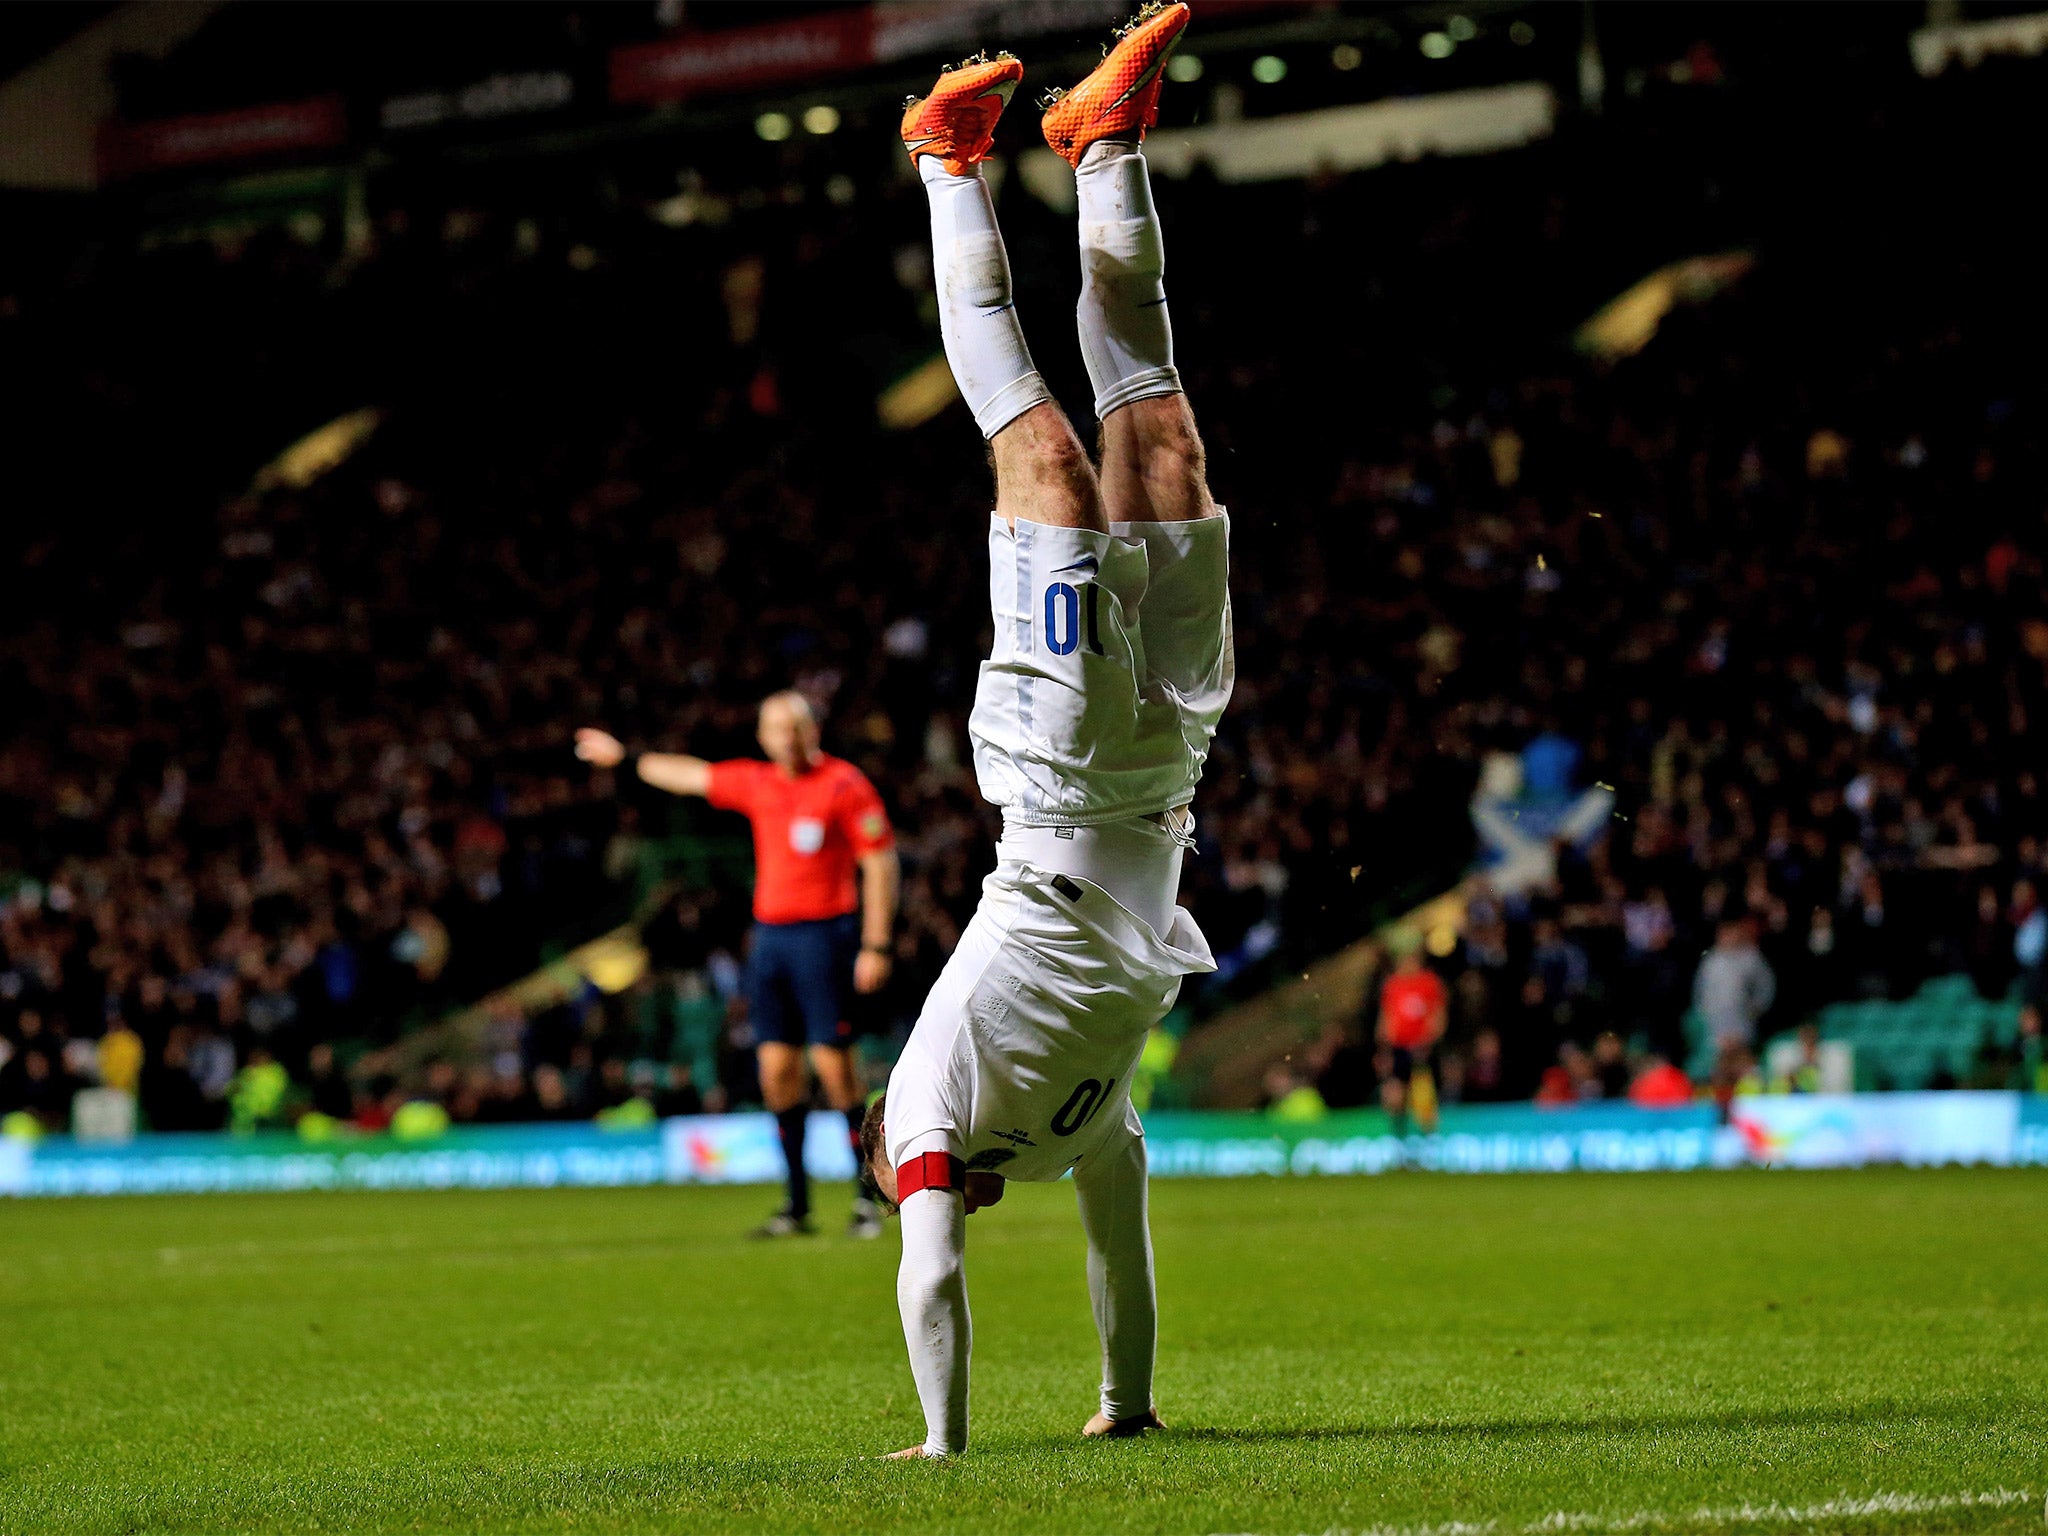 Wayne Rooney followed up his second and England's third goal with an acrobatic celebration